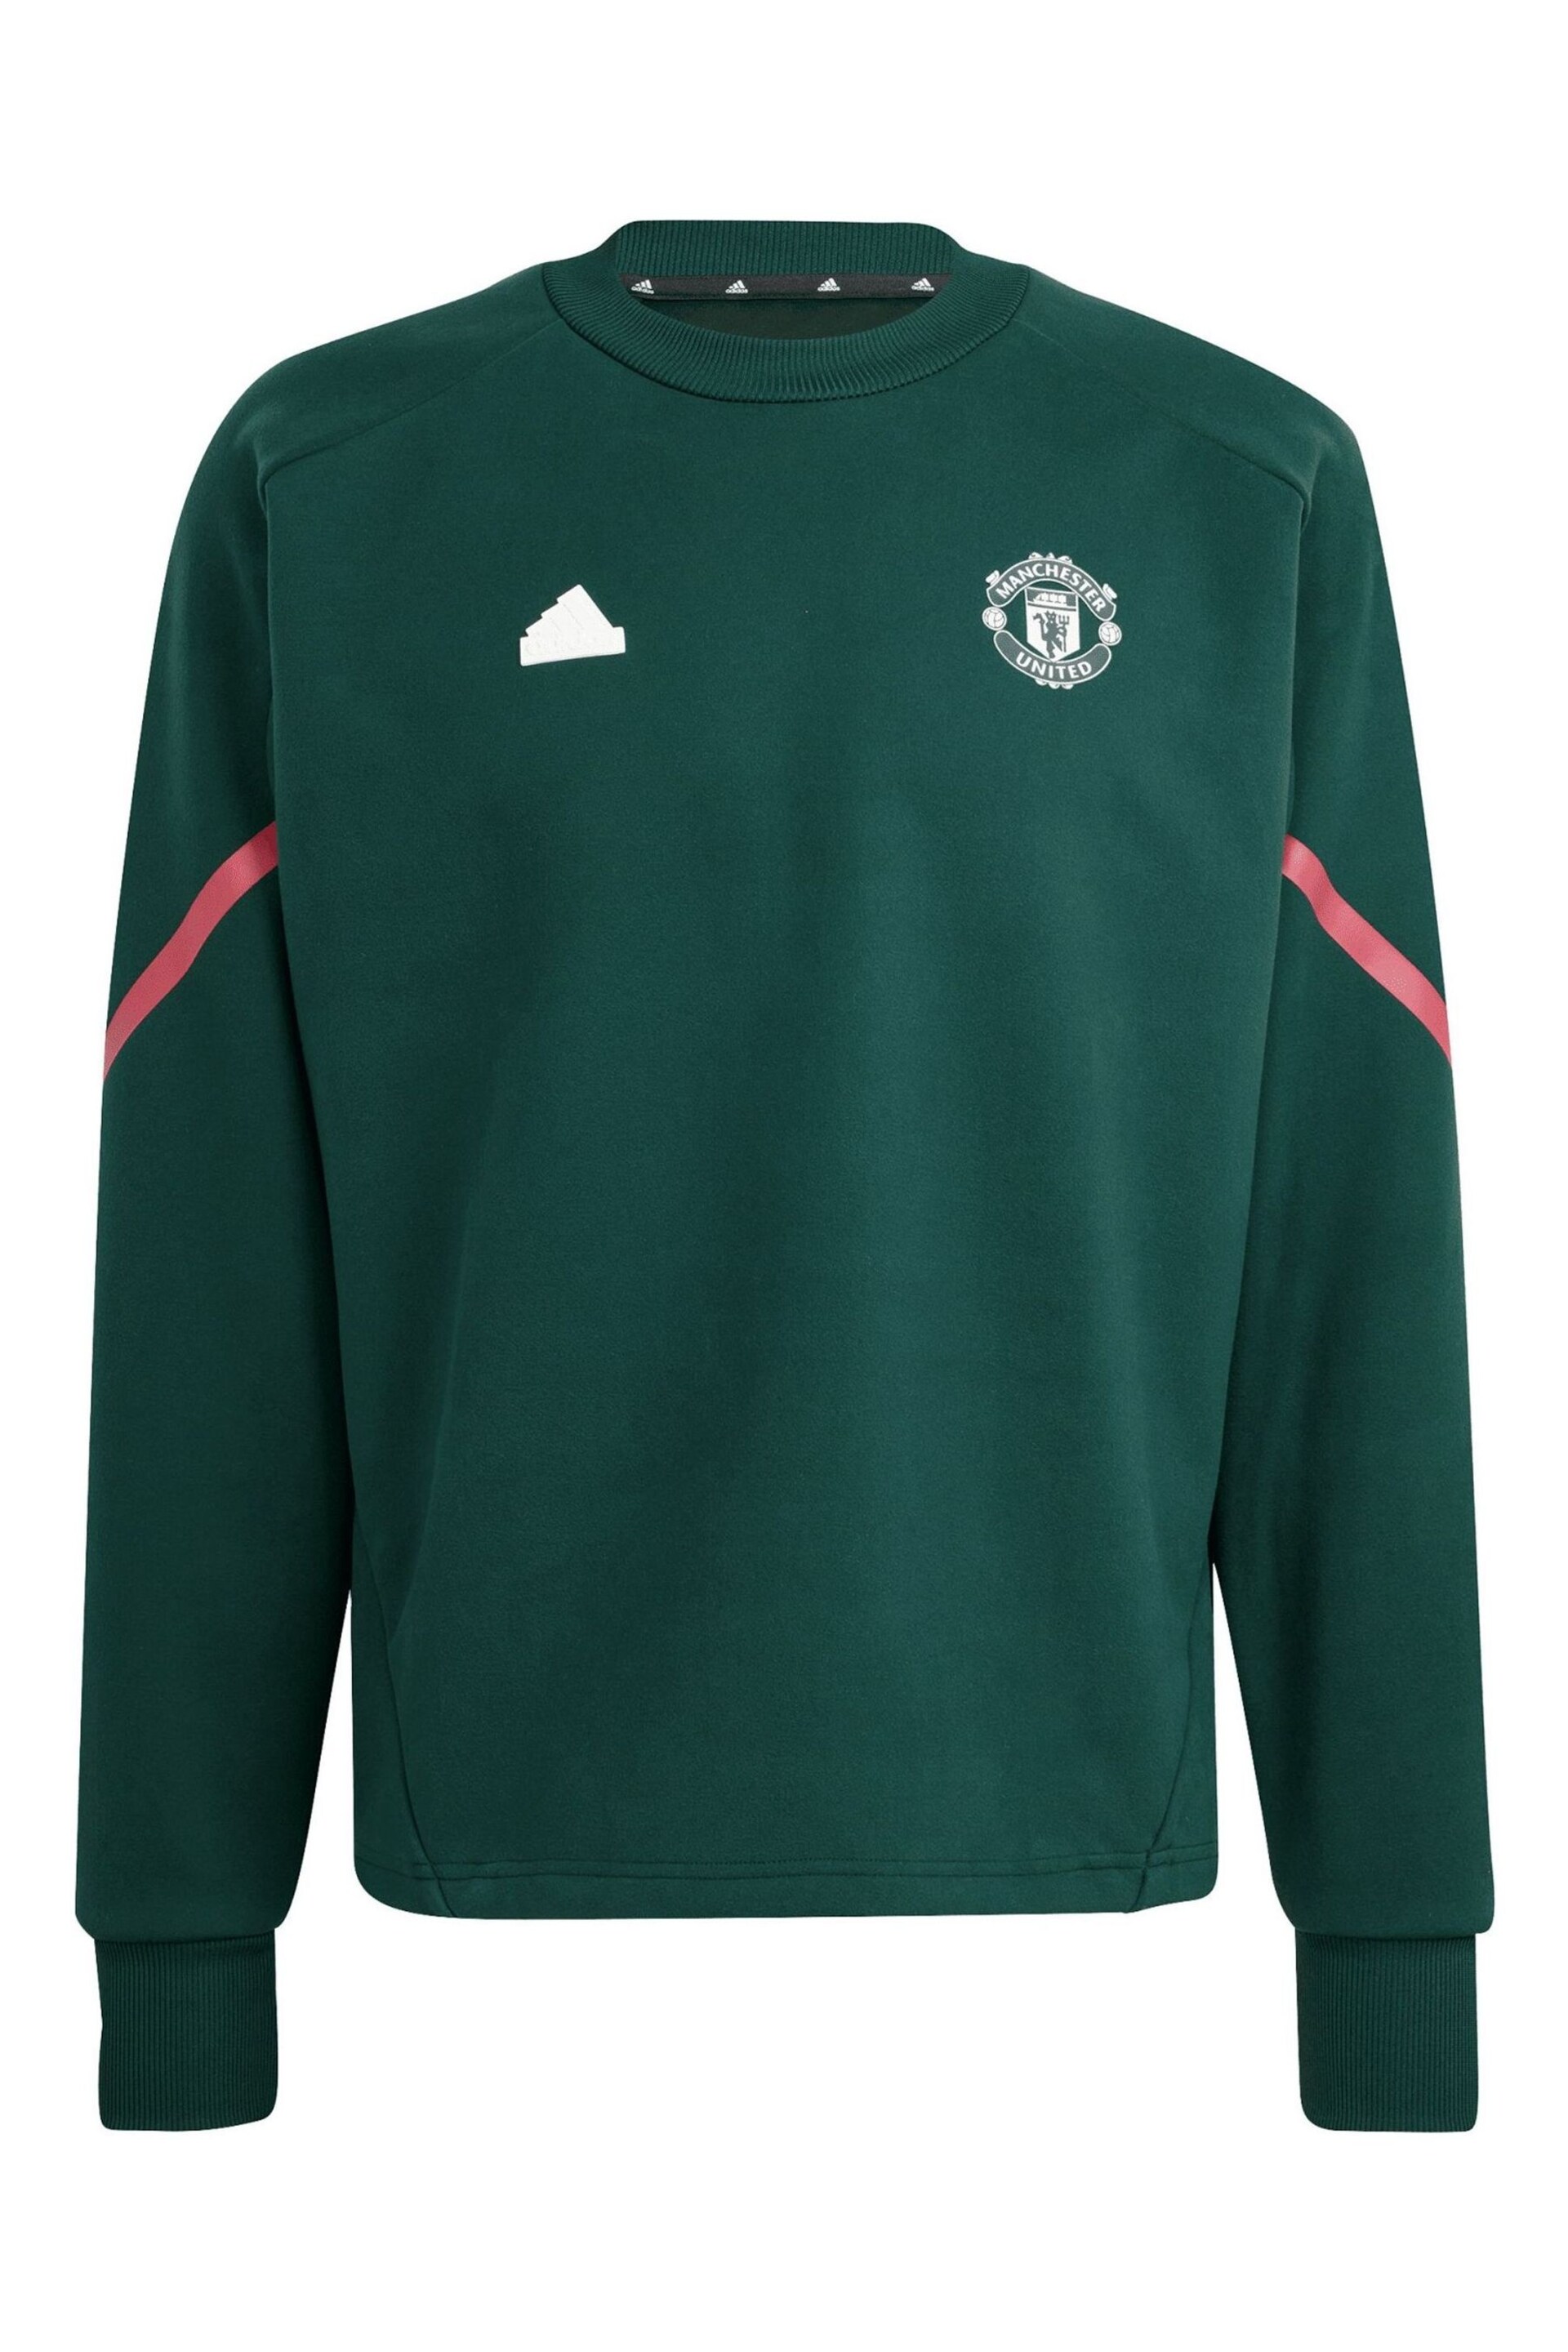 adidas Green Manchester United D4GMDY Travel Sweatshirt - Image 5 of 5